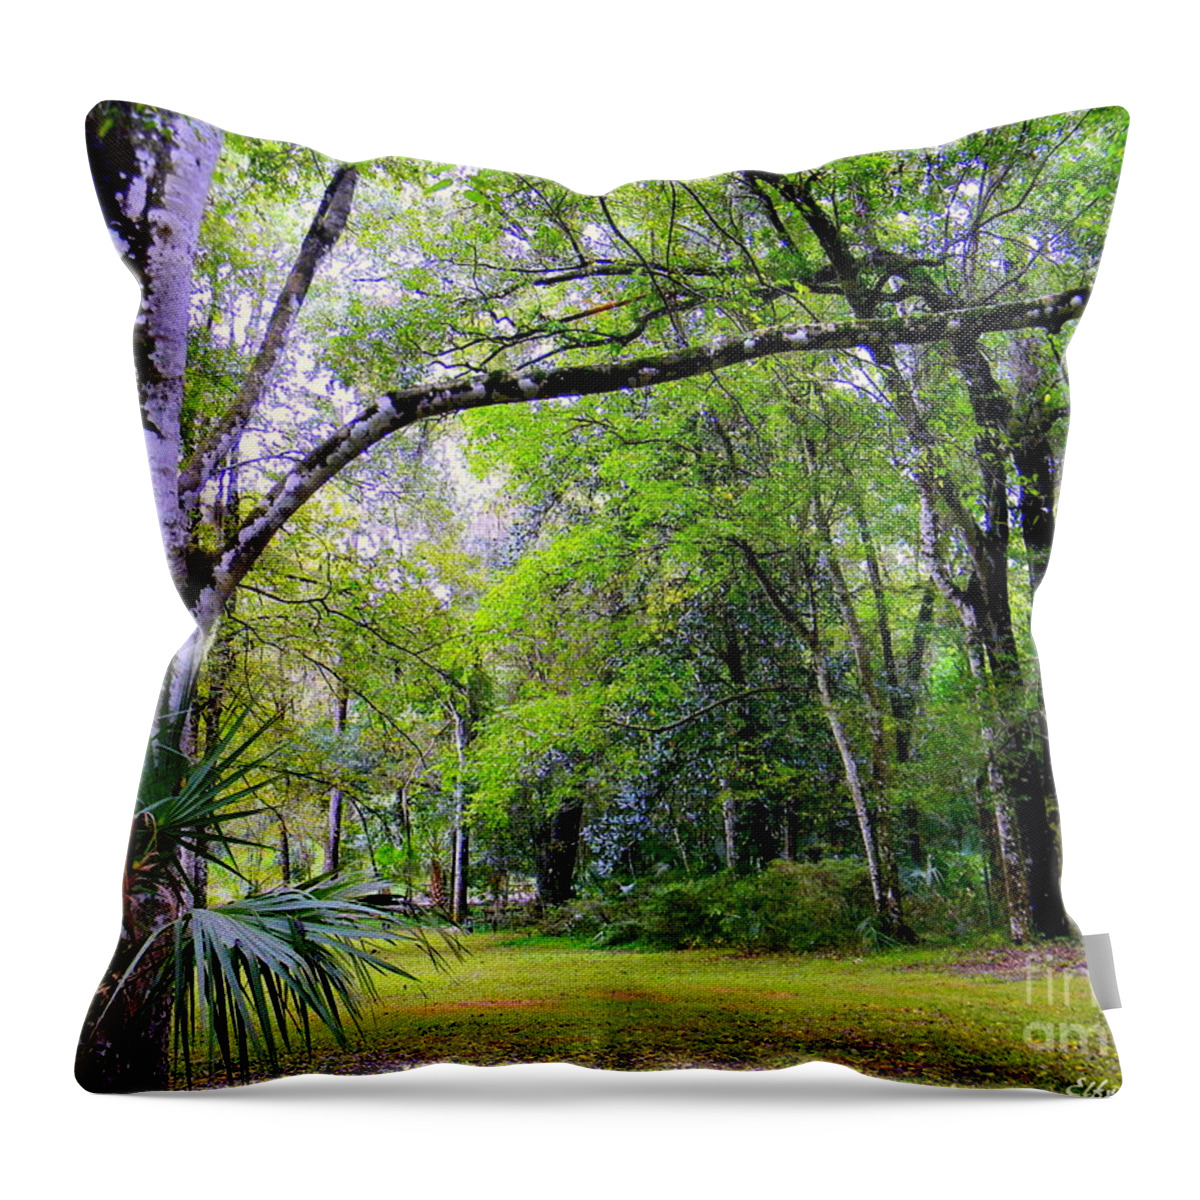 Florida Throw Pillow featuring the photograph Enchanted by Elfriede Fulda